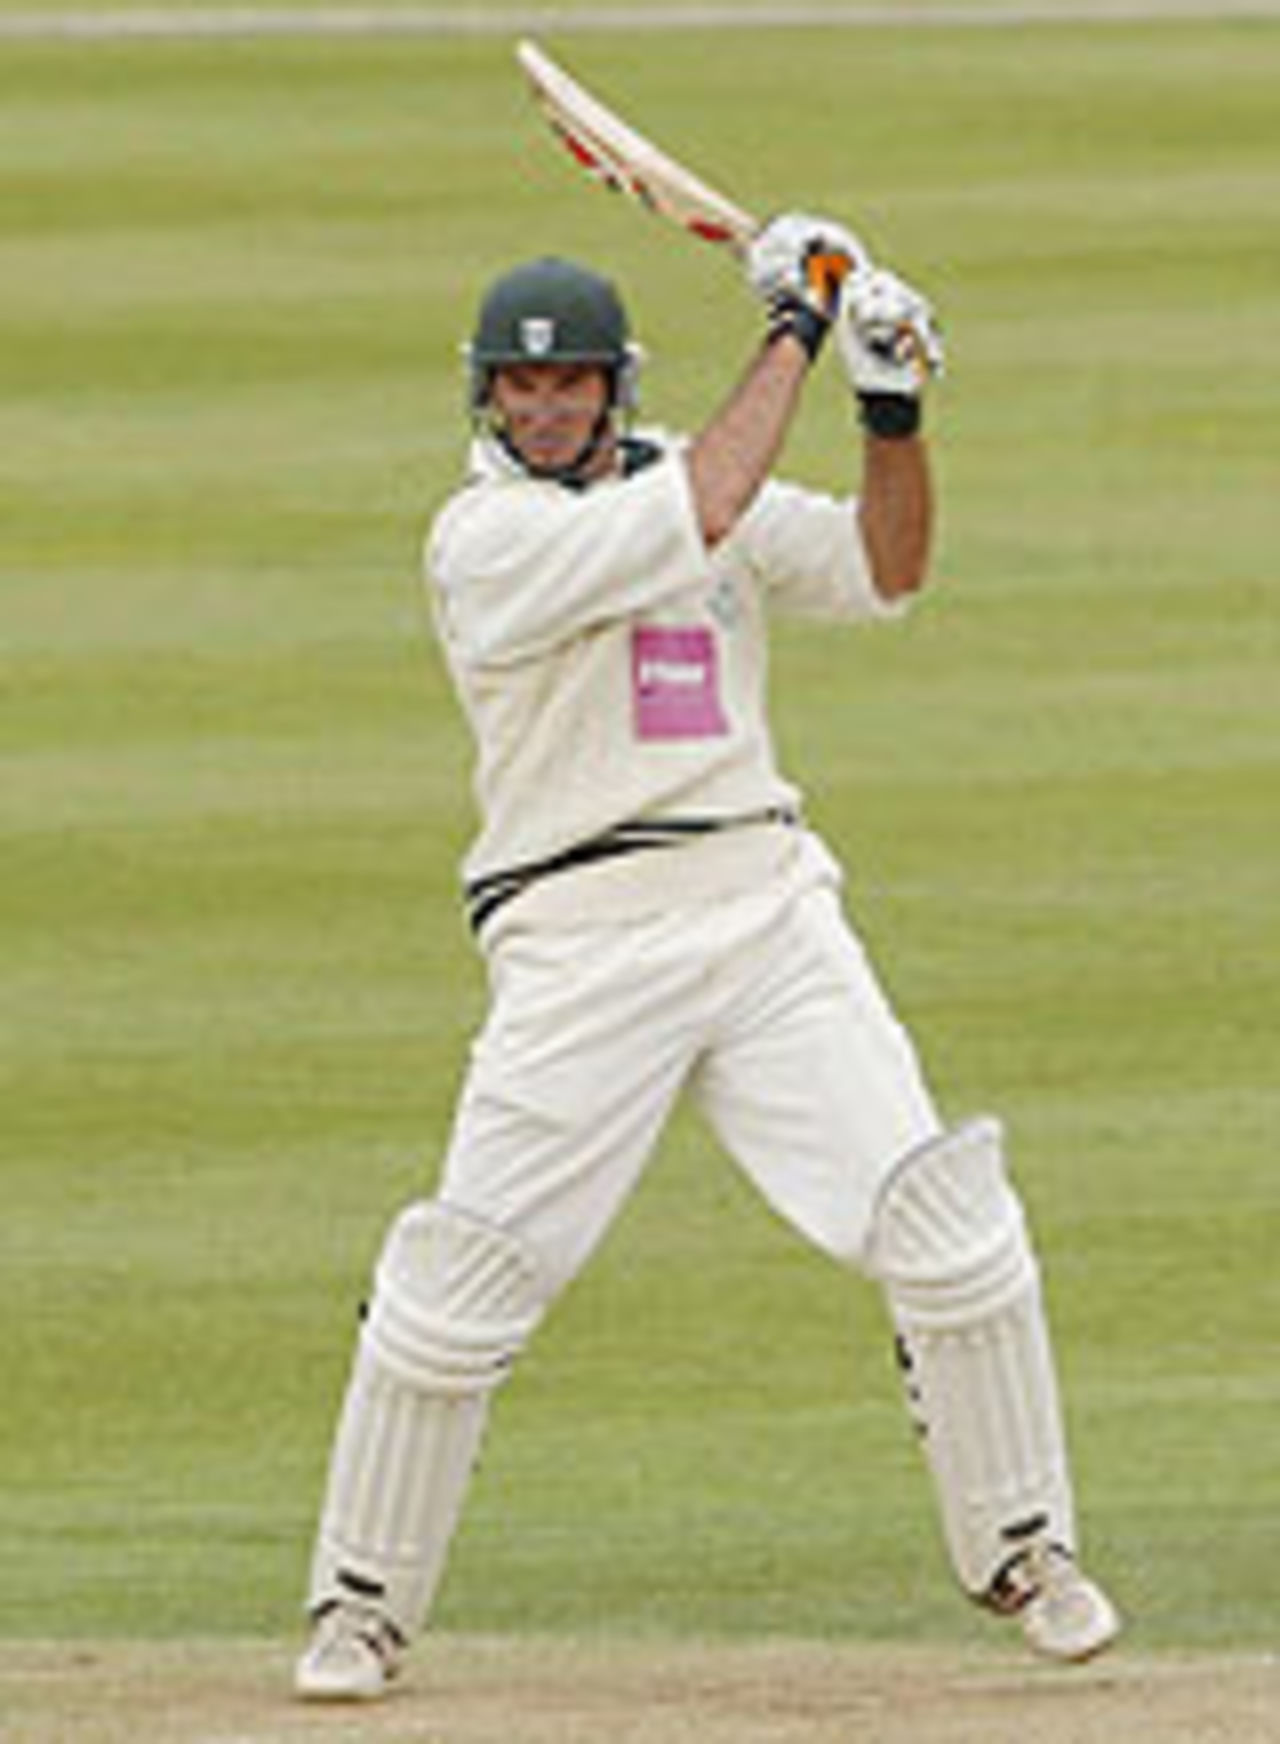 Graeme Hick cuts for four, Worcestershire v Warwickshire, Edgbaston, May 25, 2004